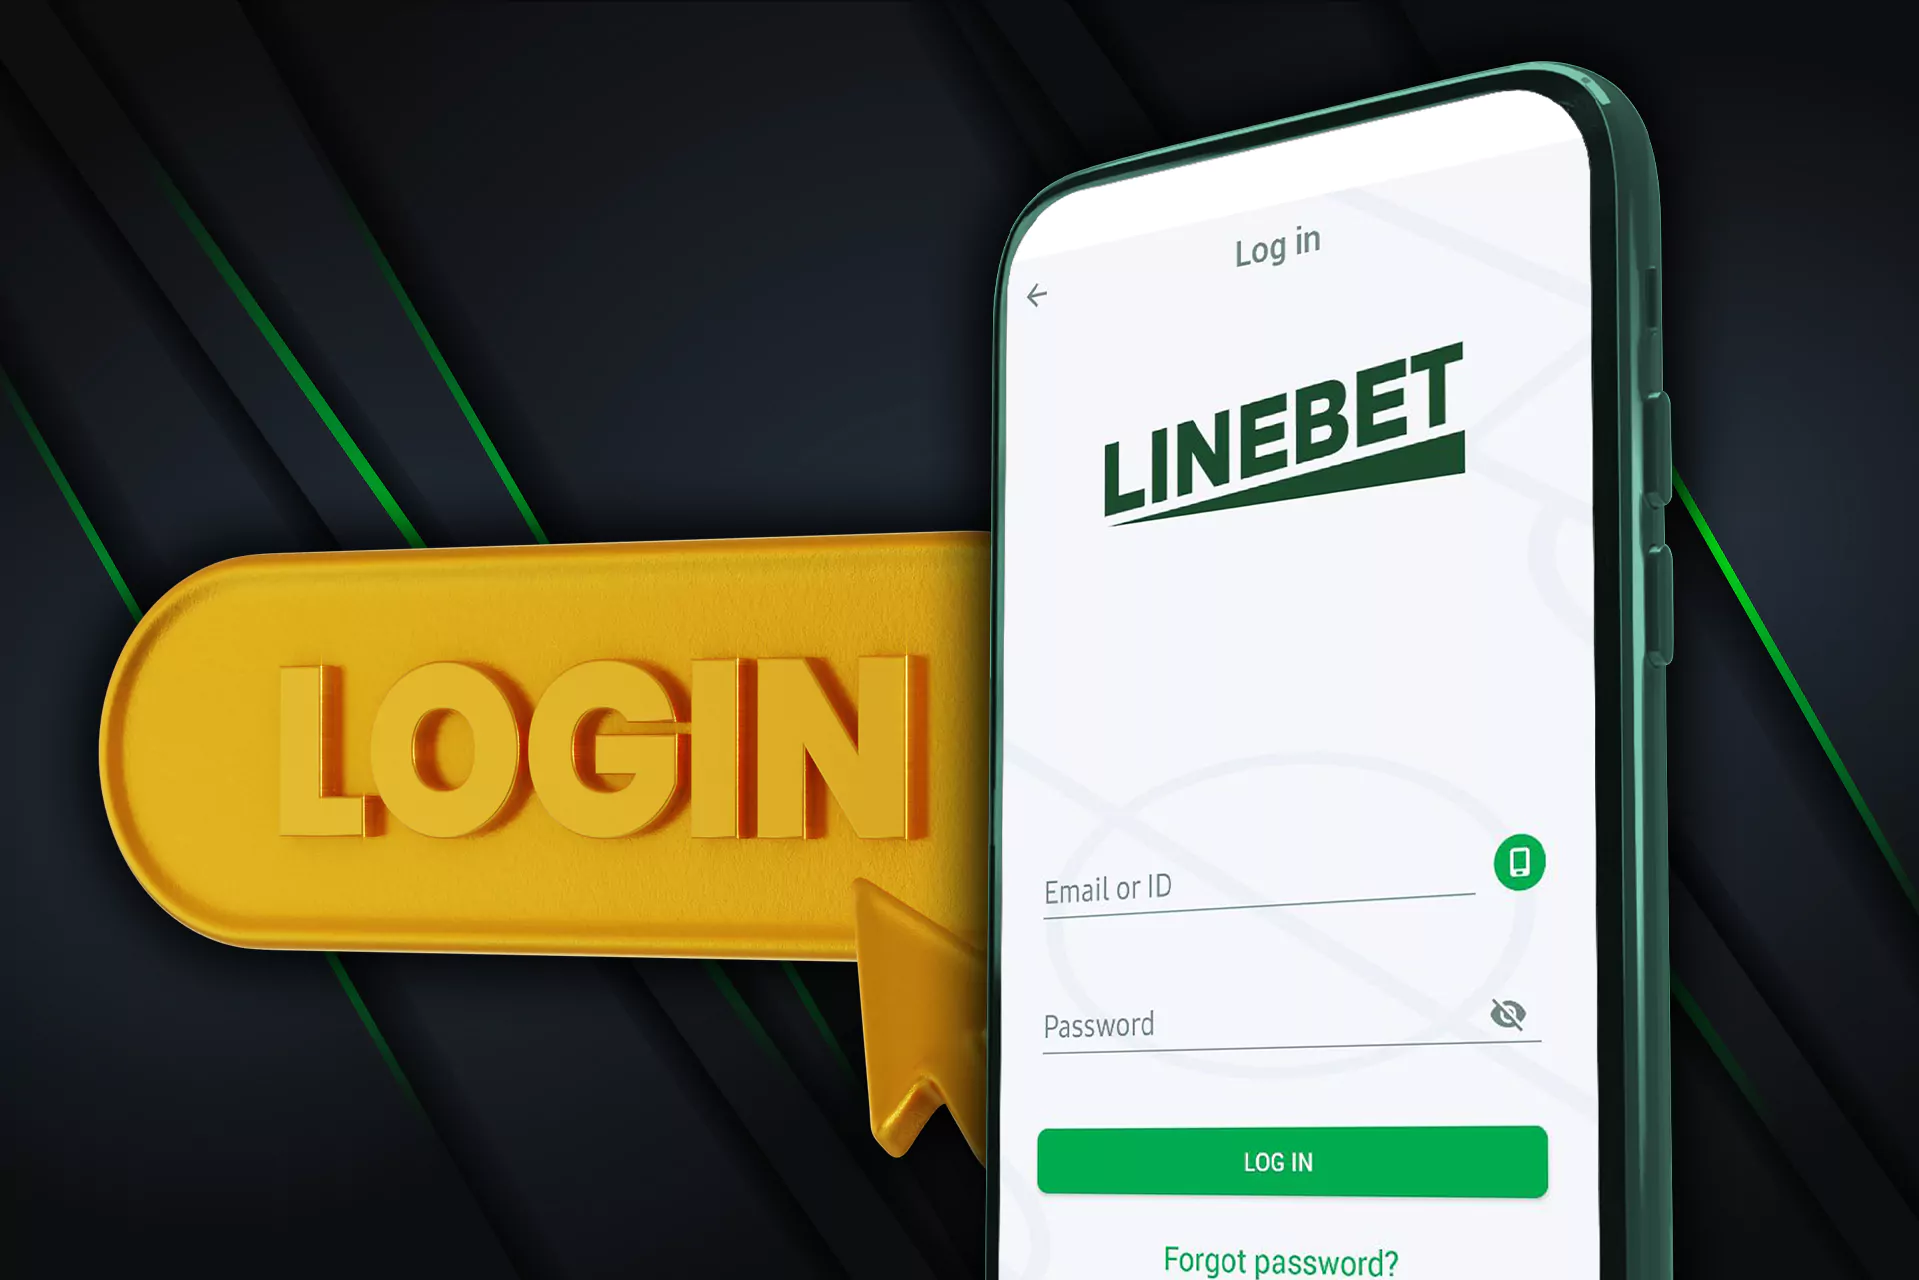 Enter the password and a username and log in to Linebet.